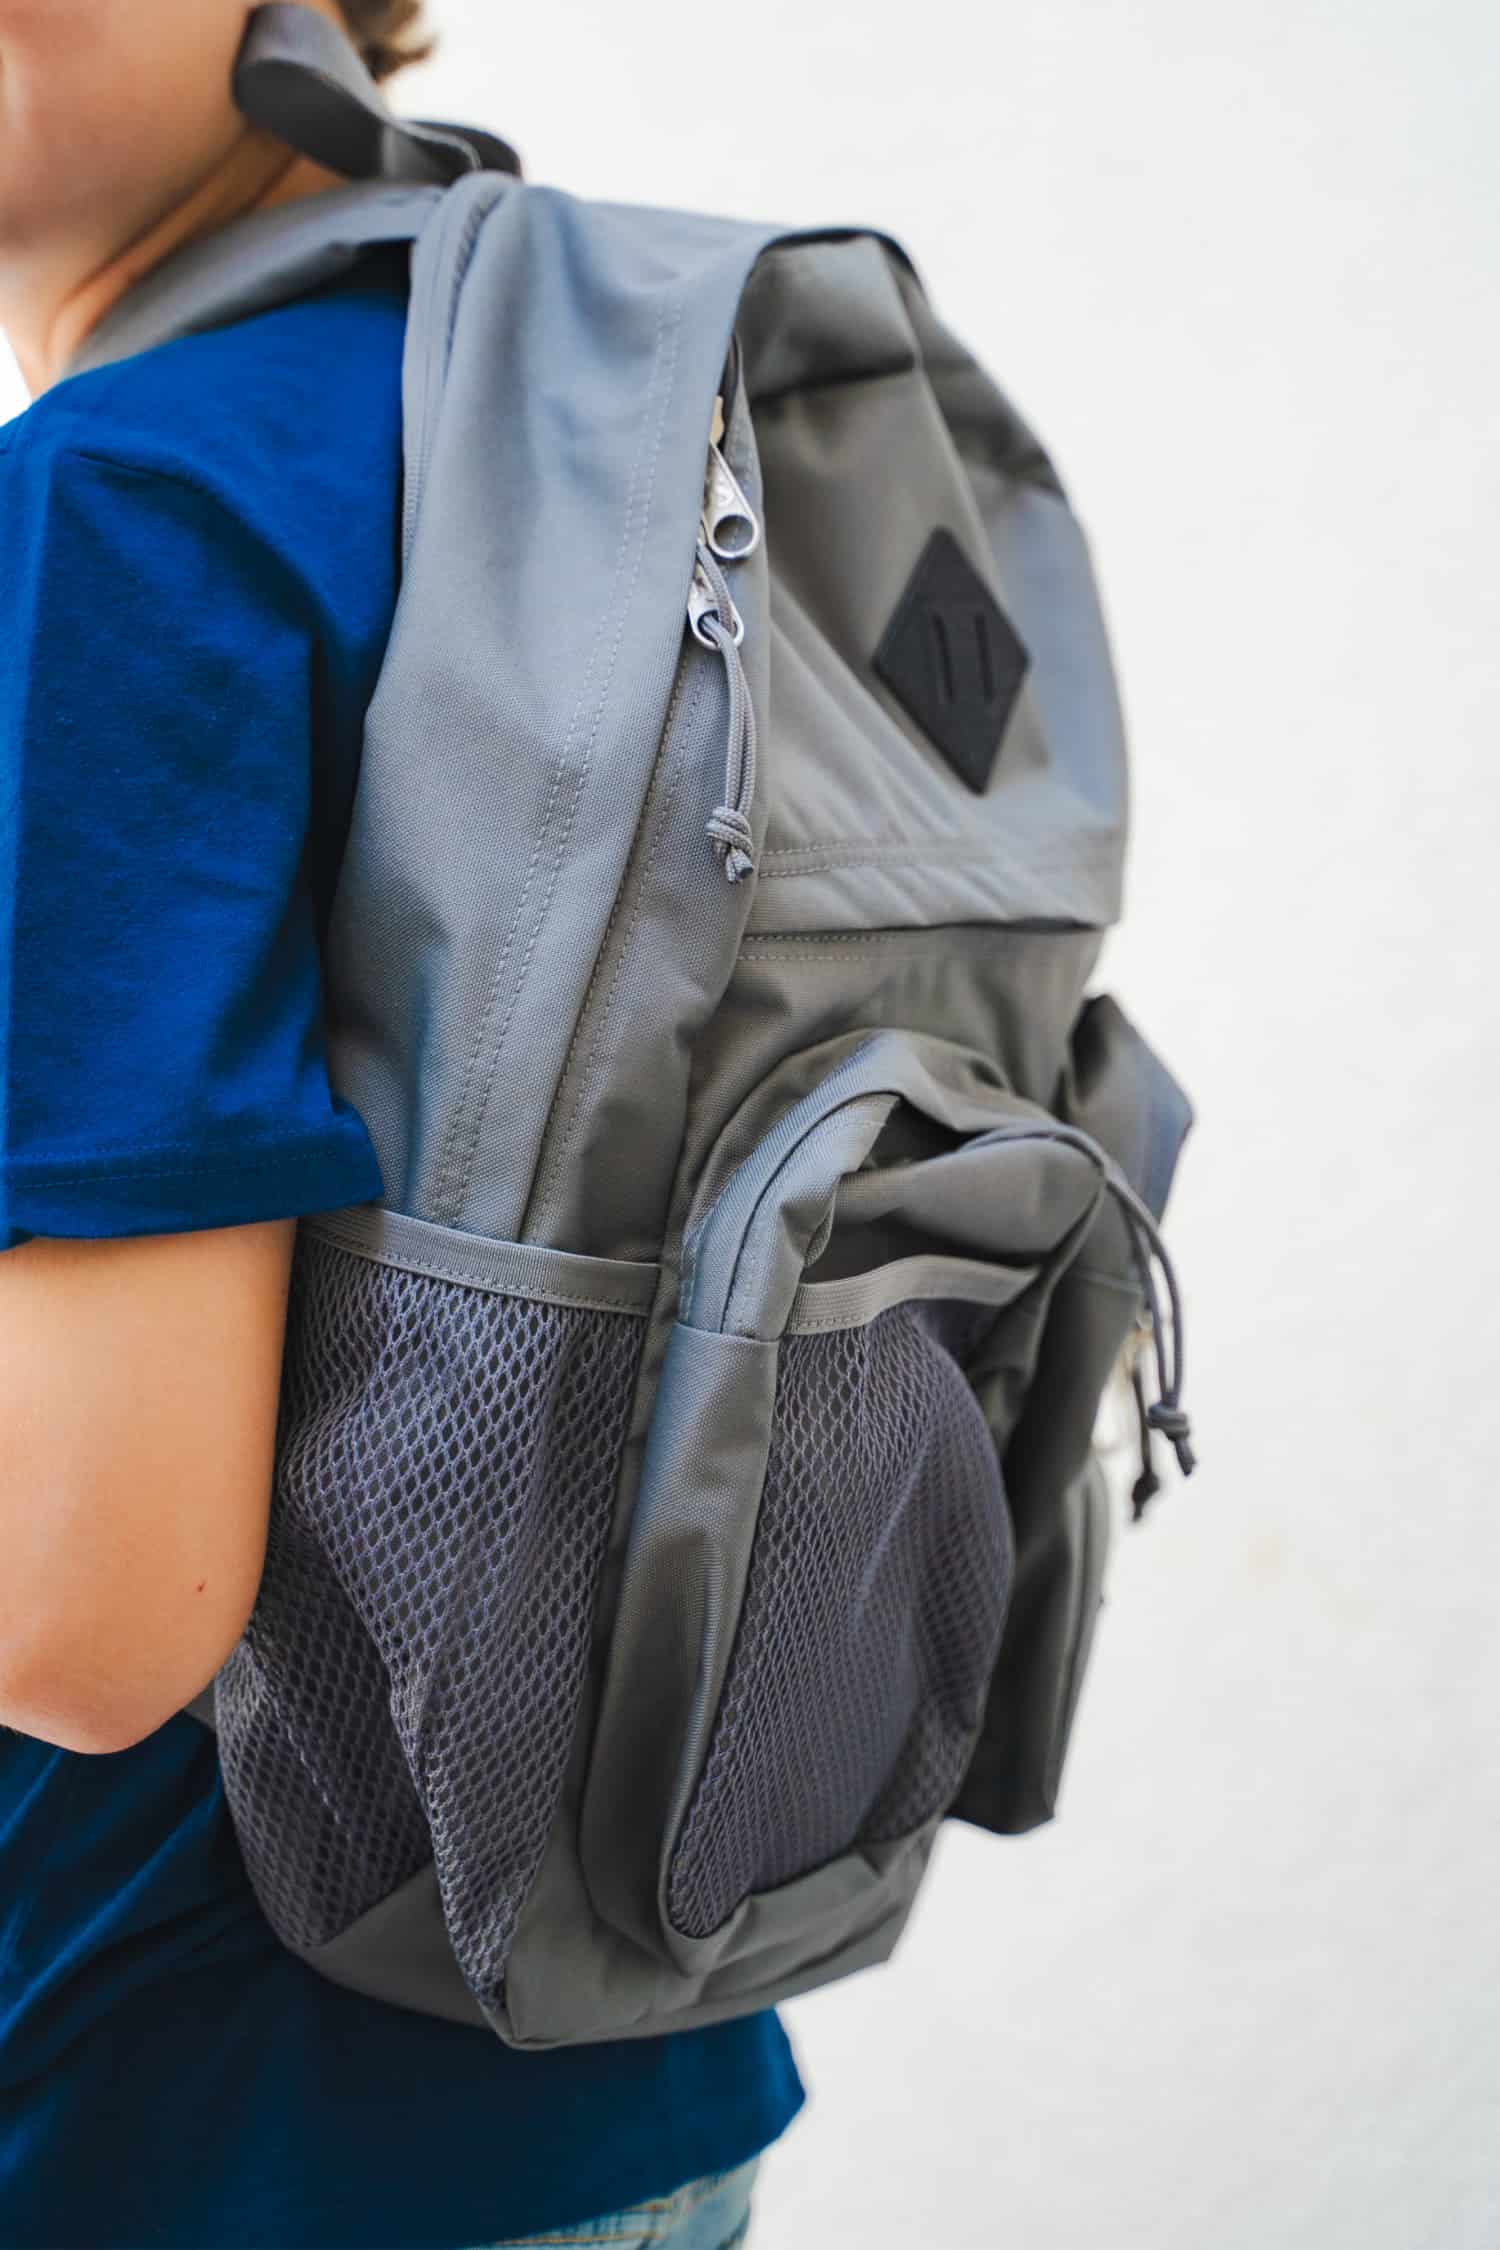 Up close side view of grey backpack.